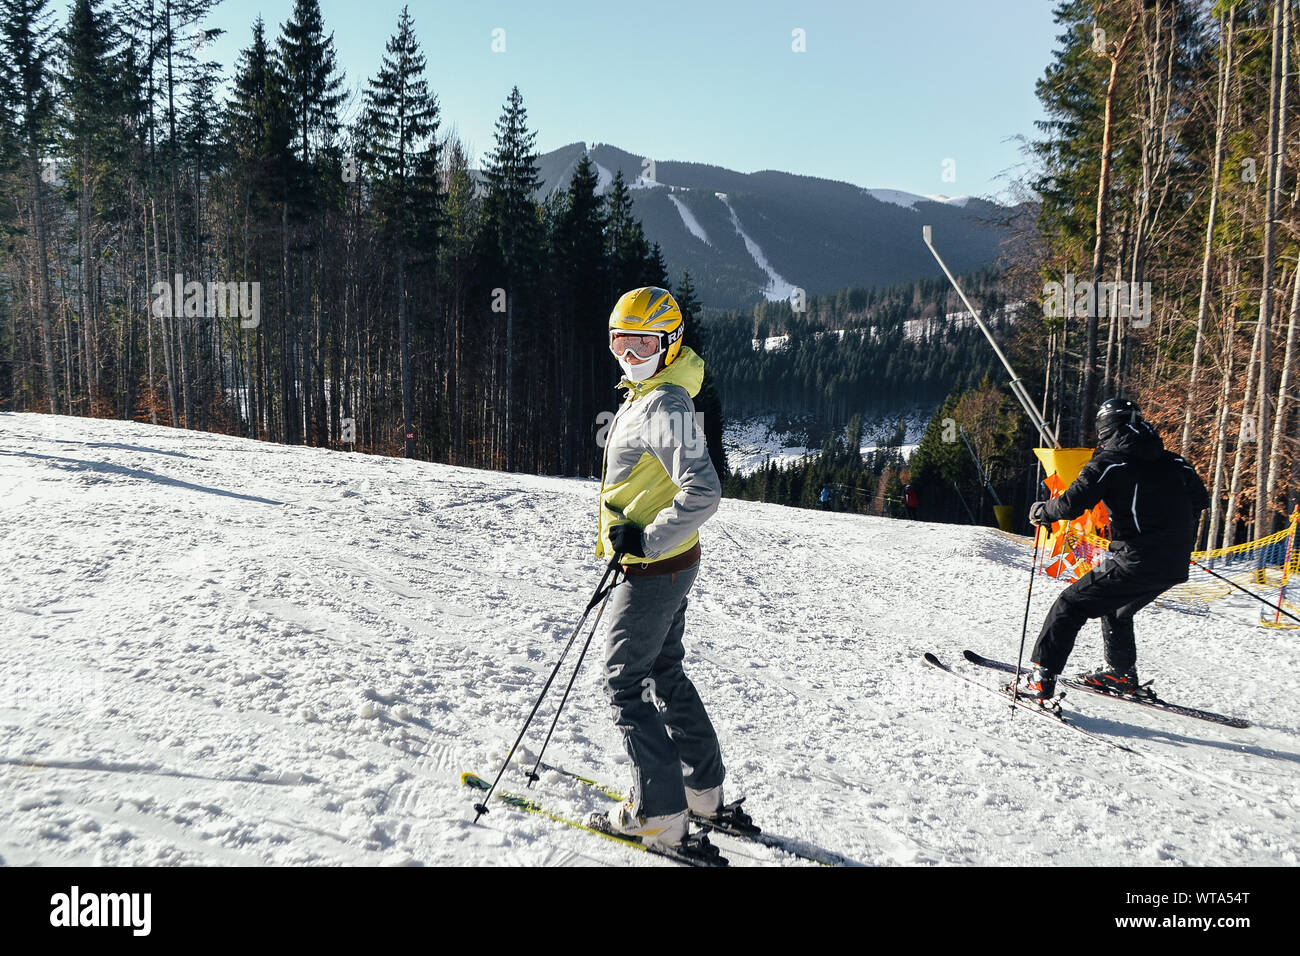 Bukovel, Ukraine. 2, 2017 A skier rides in beautiful sunny weather in winter on the side of a mountain. The girl is skiing looking in the frame. Resor Stock Photo